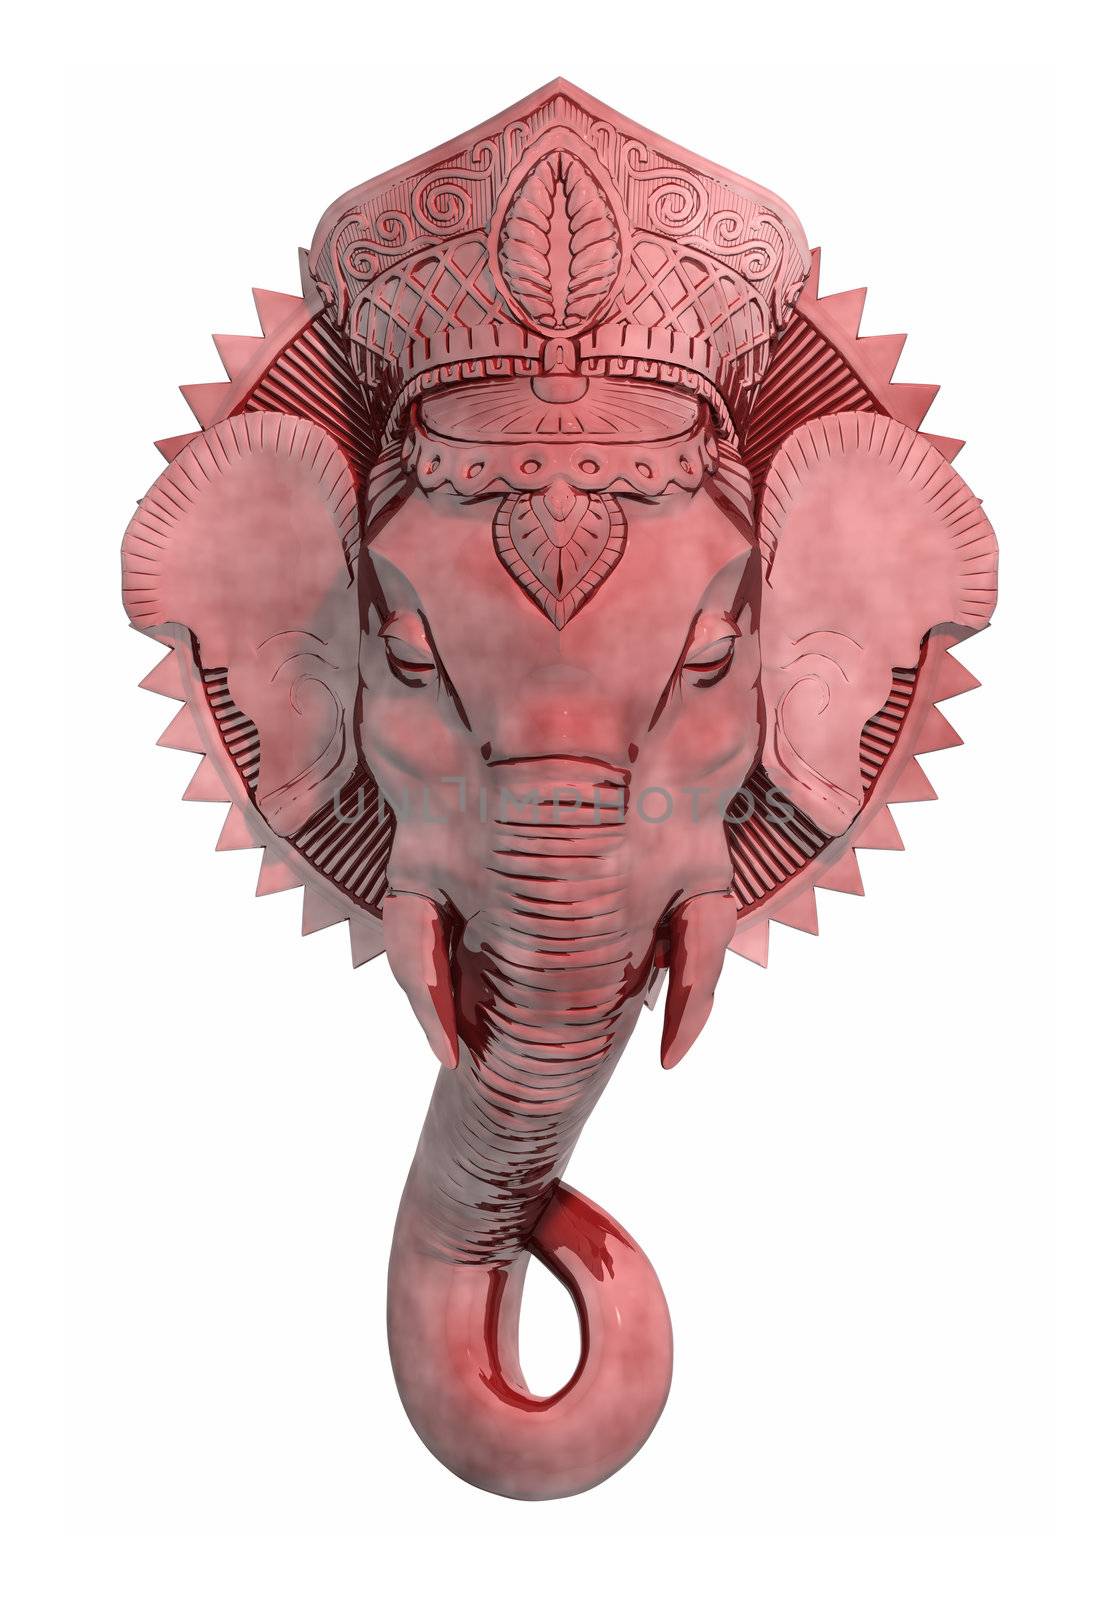 An image of a beautiful red ganesh sculpture